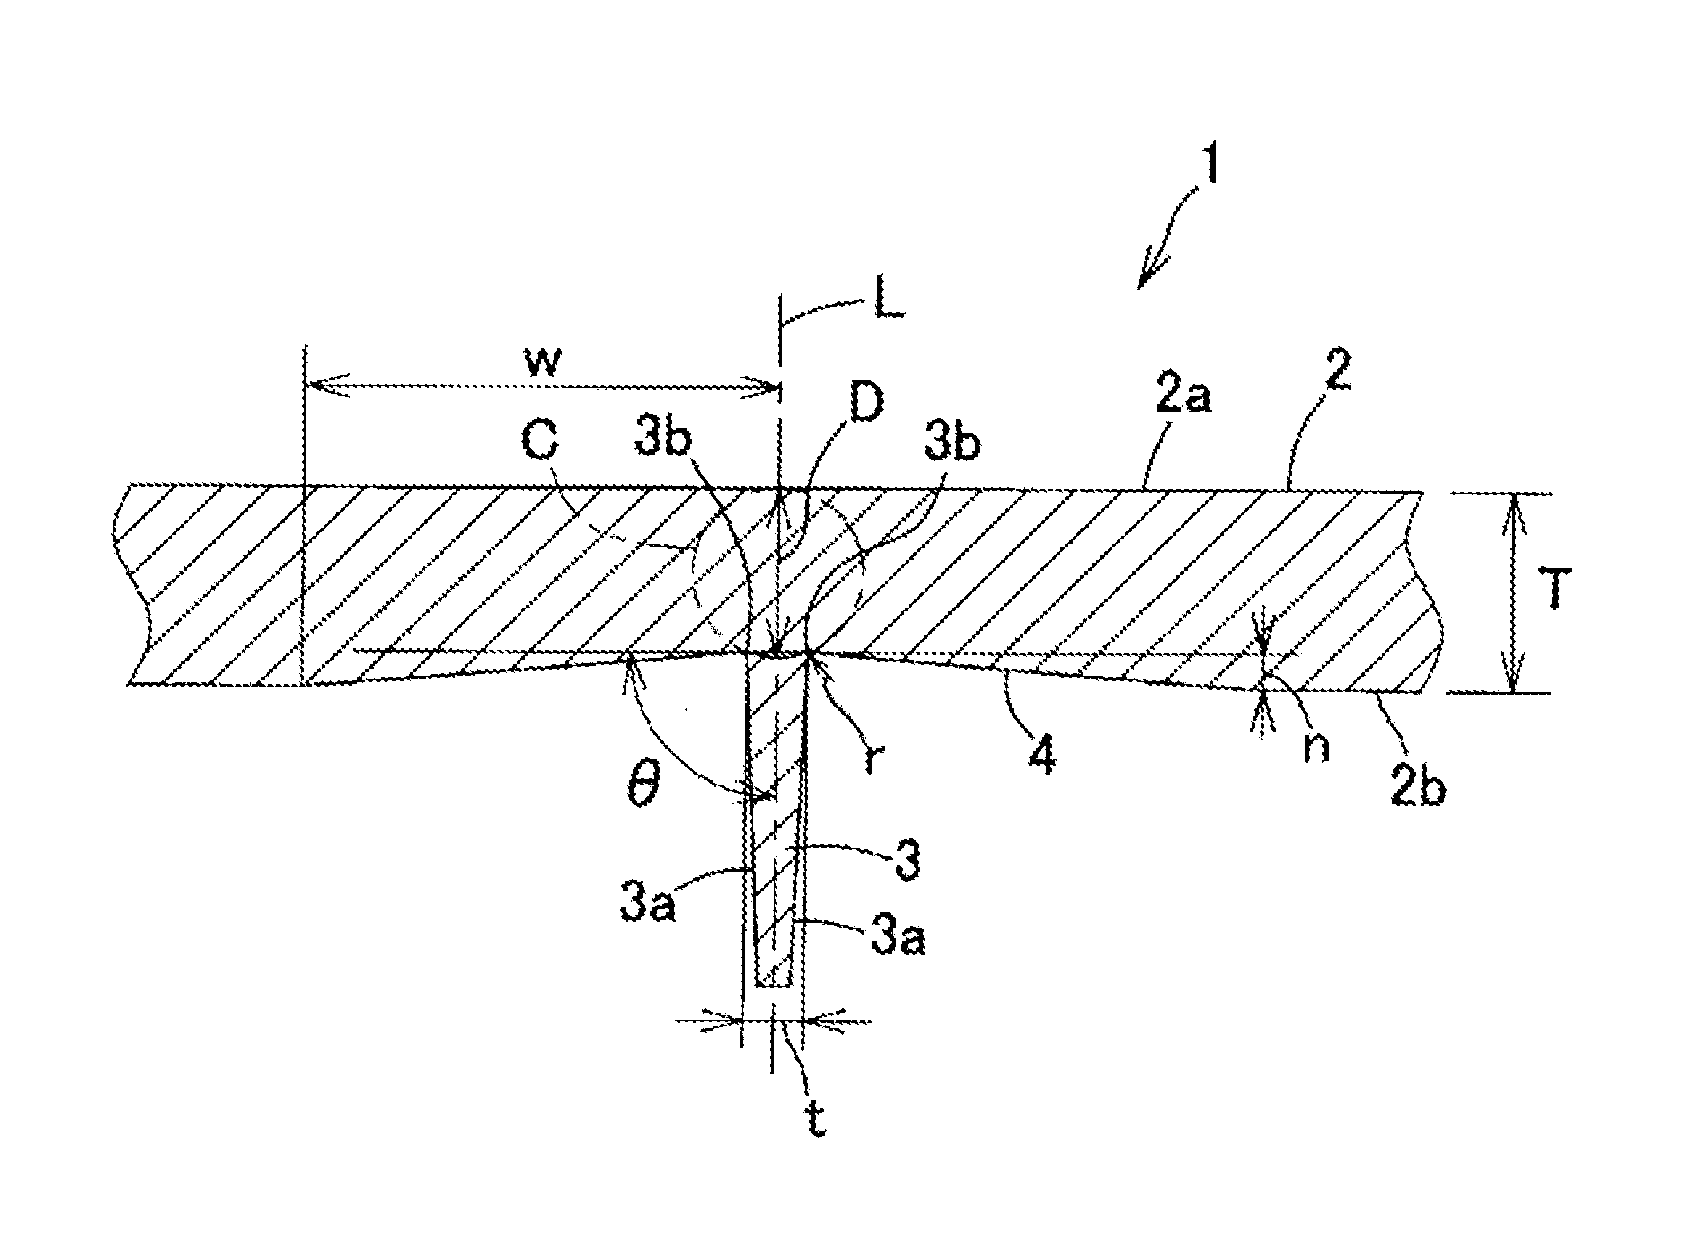 Moulded body having specific cross-sectional structure